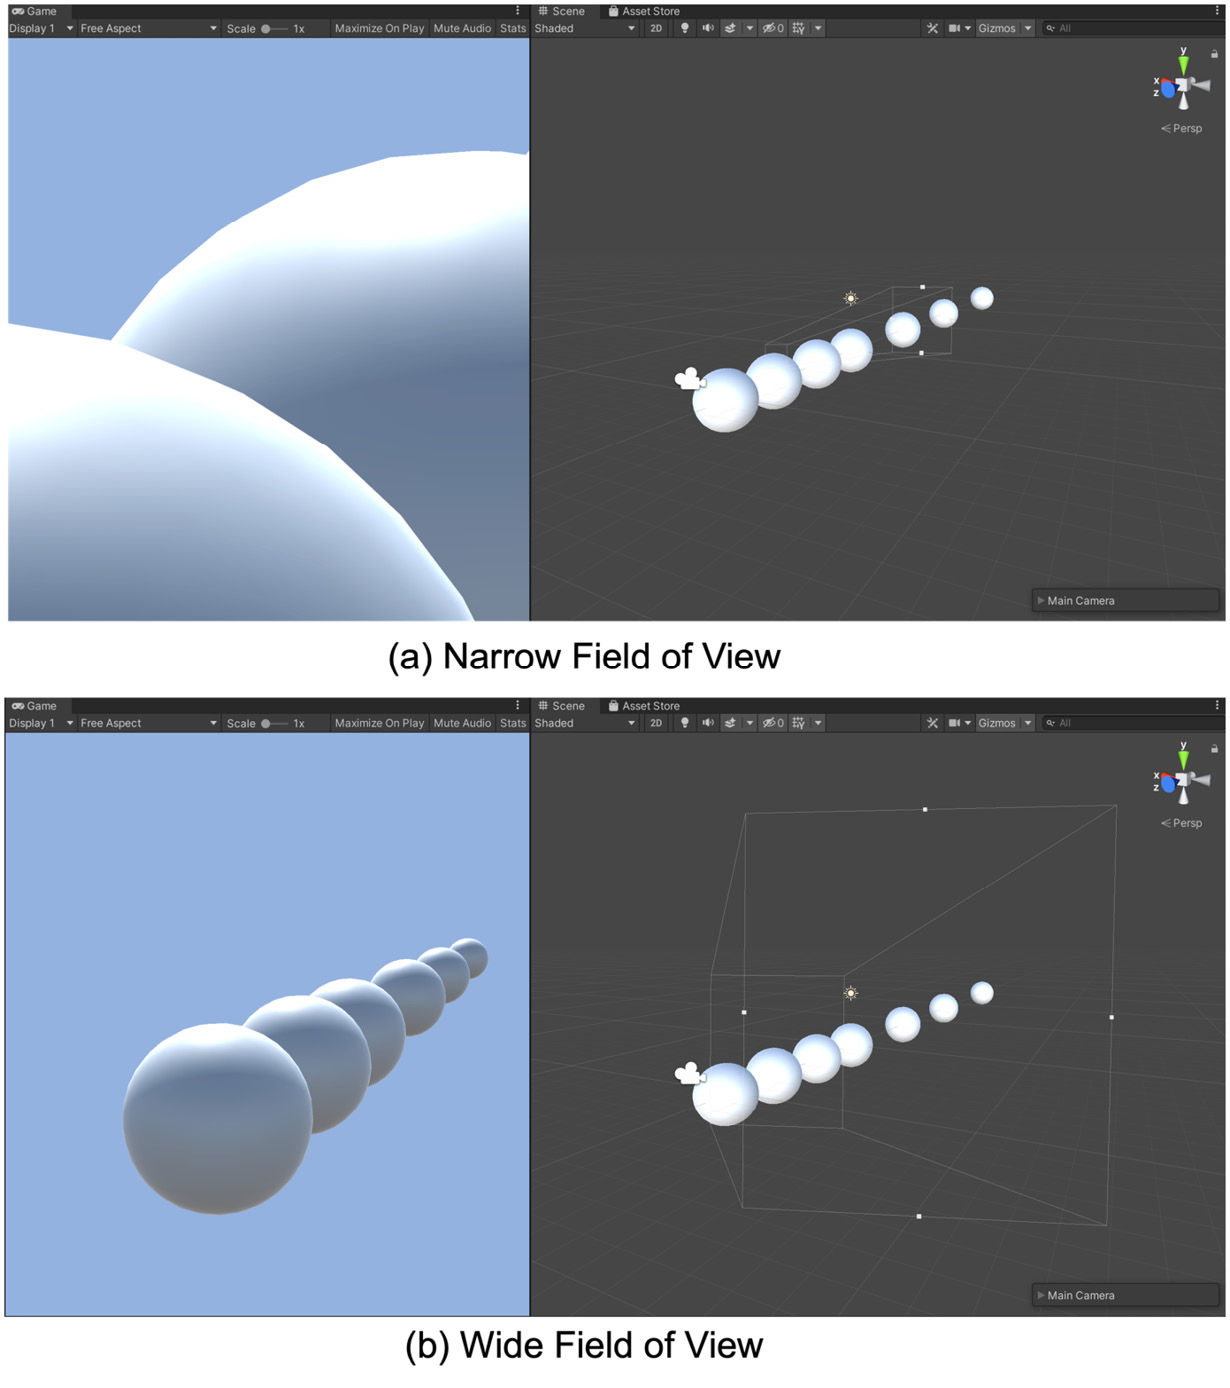 Figure 4.9: Different FOVs demonstrated by a camera in the Unity game engine
